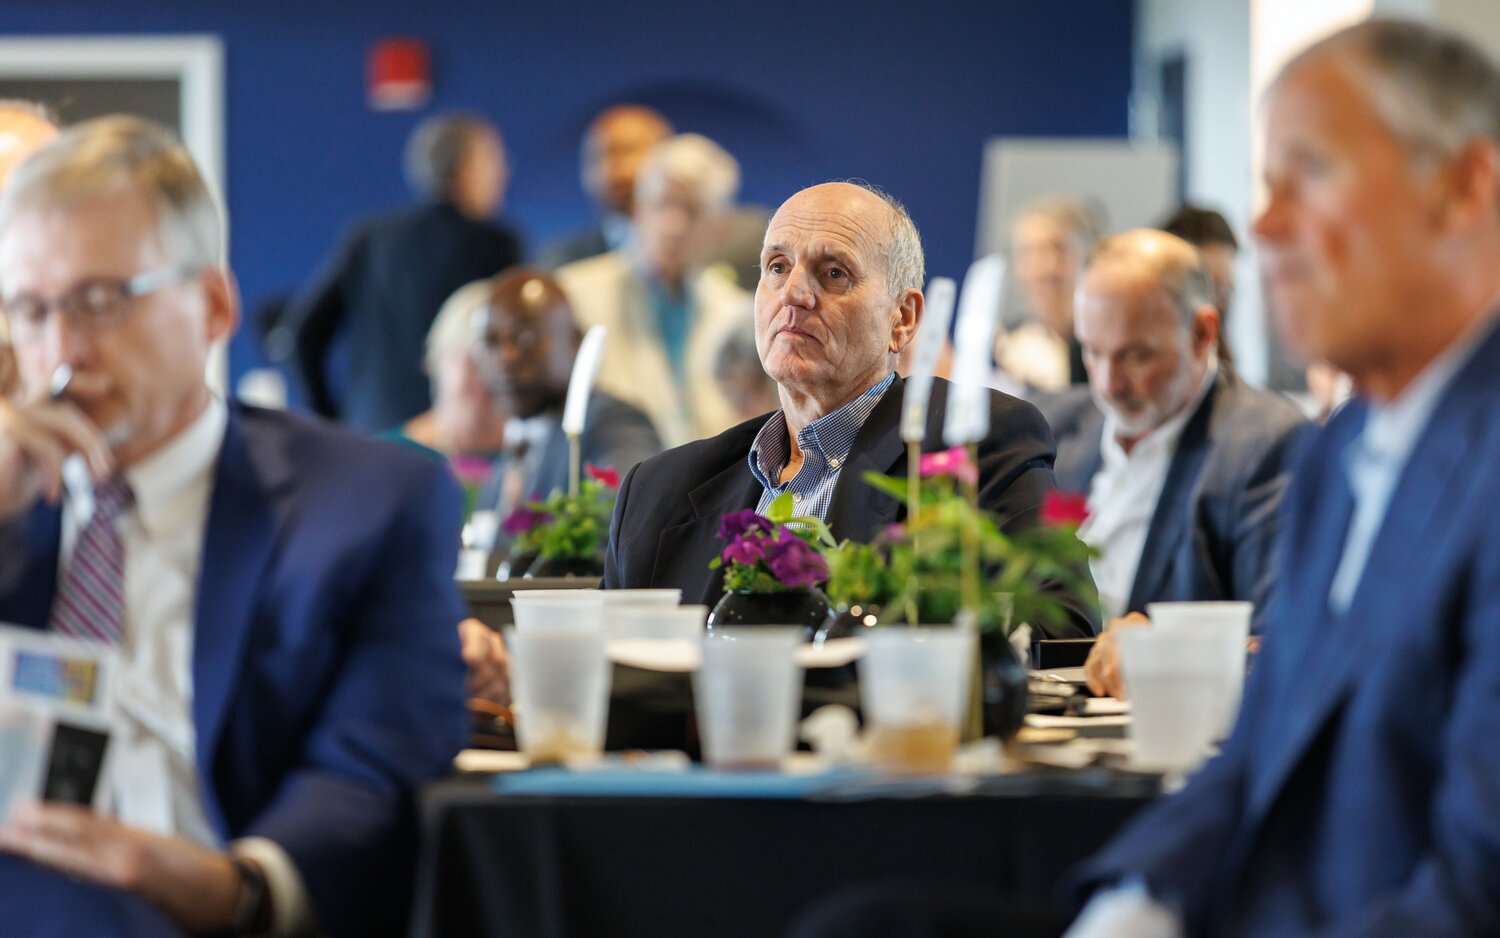 Mac Healy listens from the audience during the third annual Downtown Visionaries awards luncheon Thursday at Segra Stadium.